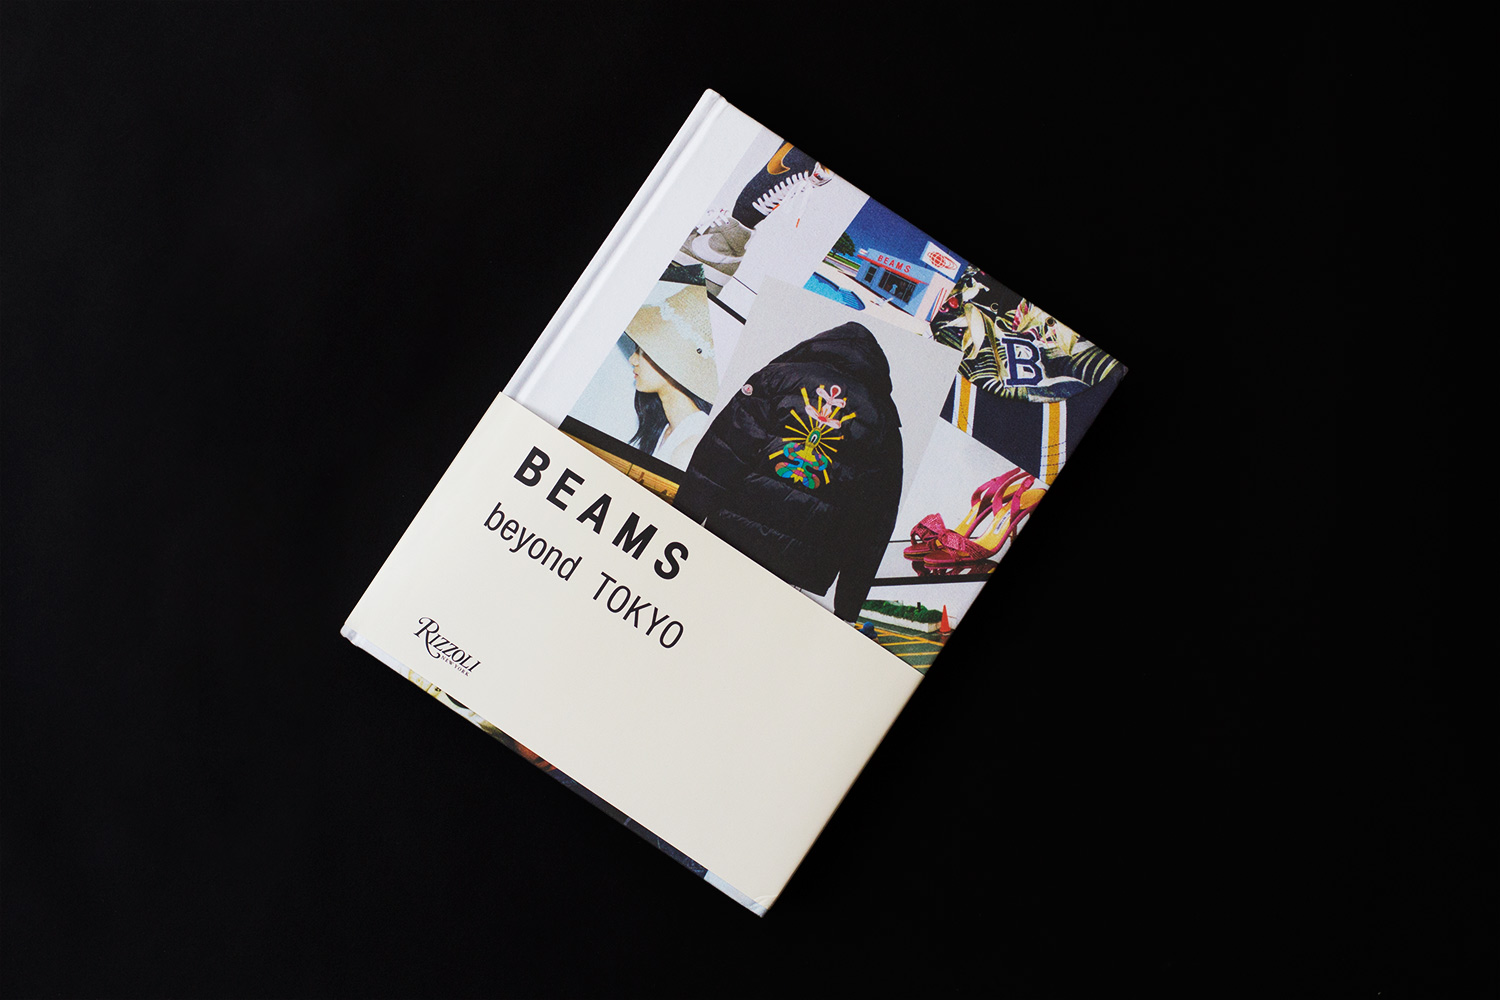 Iconic Japanese Retailer Beams Turns 40, Releases Book - The 